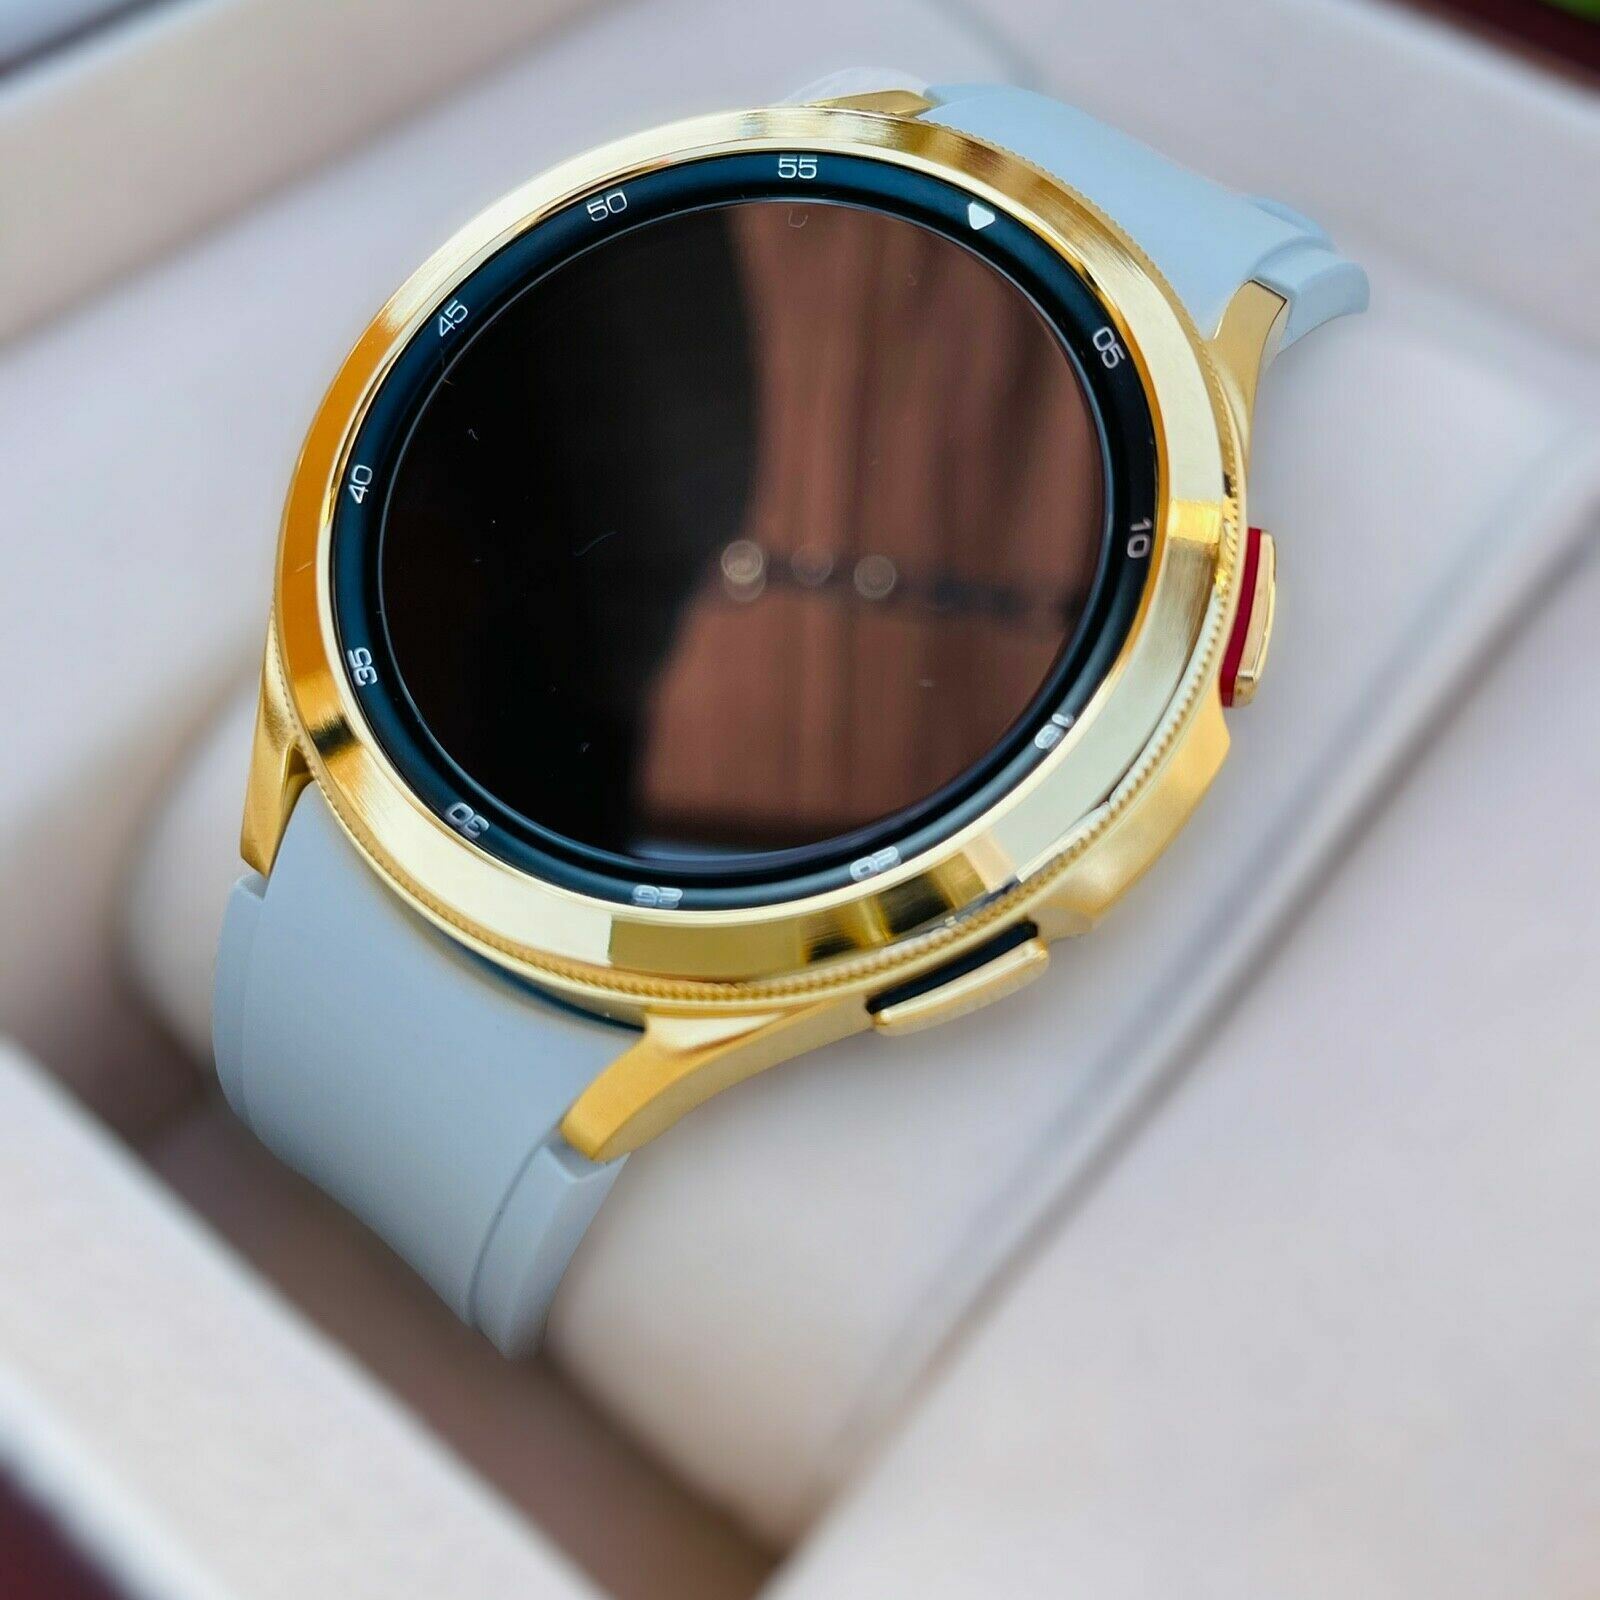 Custom 24k Gold Plated 42mm Samsung Galaxy Watch 4 POLISHED Gold Bezel Gray Band - image 1 of 11